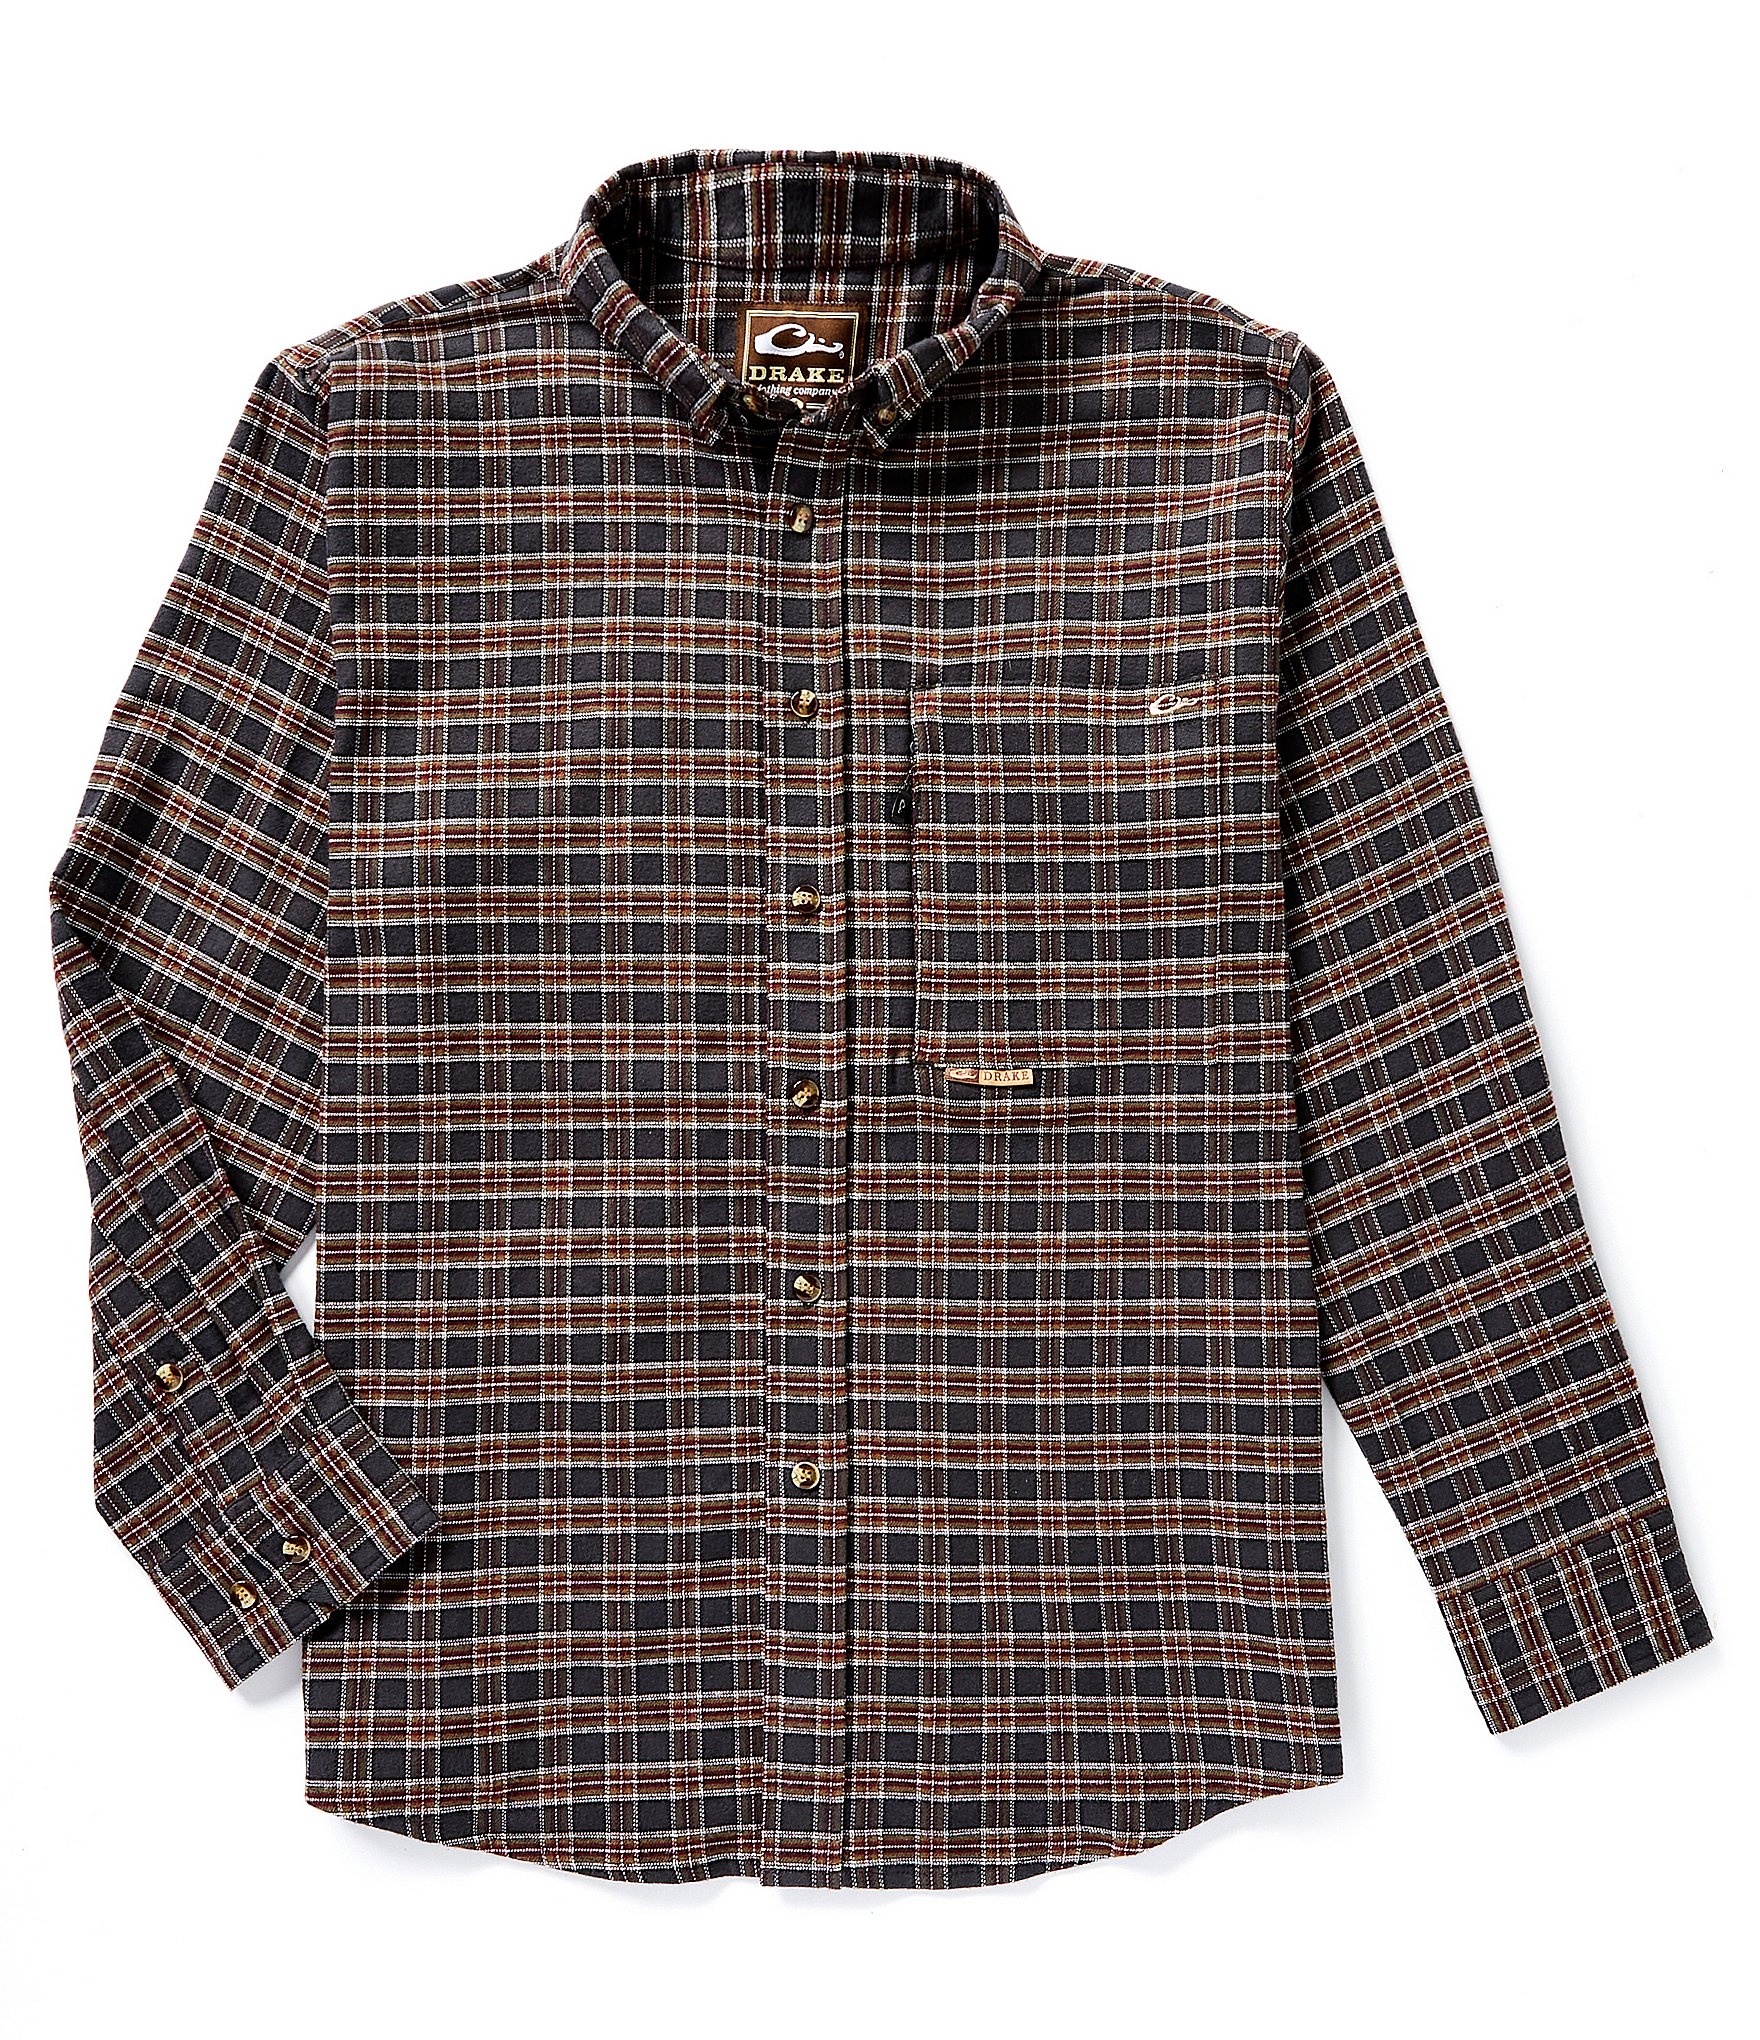 Green Men's Casual Button-Up Shirts